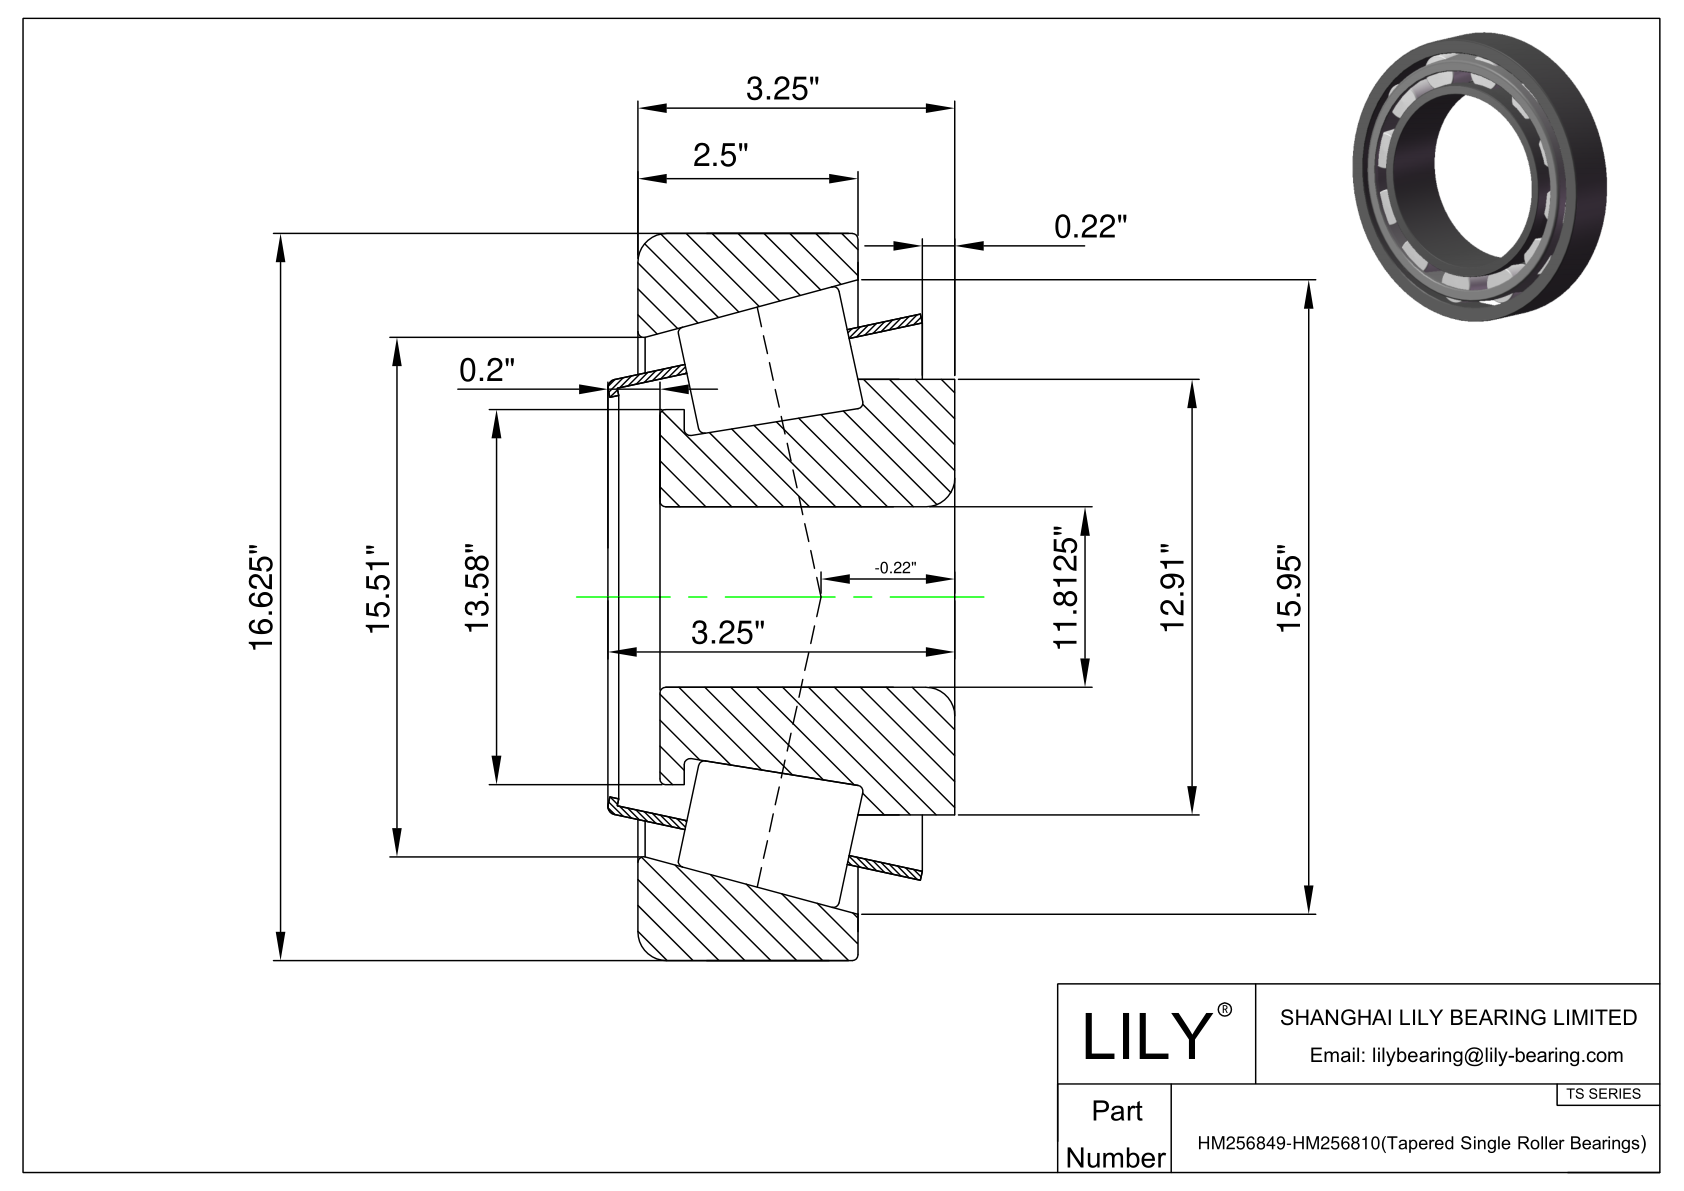 HM256849-HM256810 TS (Tapered Single Roller Bearings) (Imperial) cad drawing